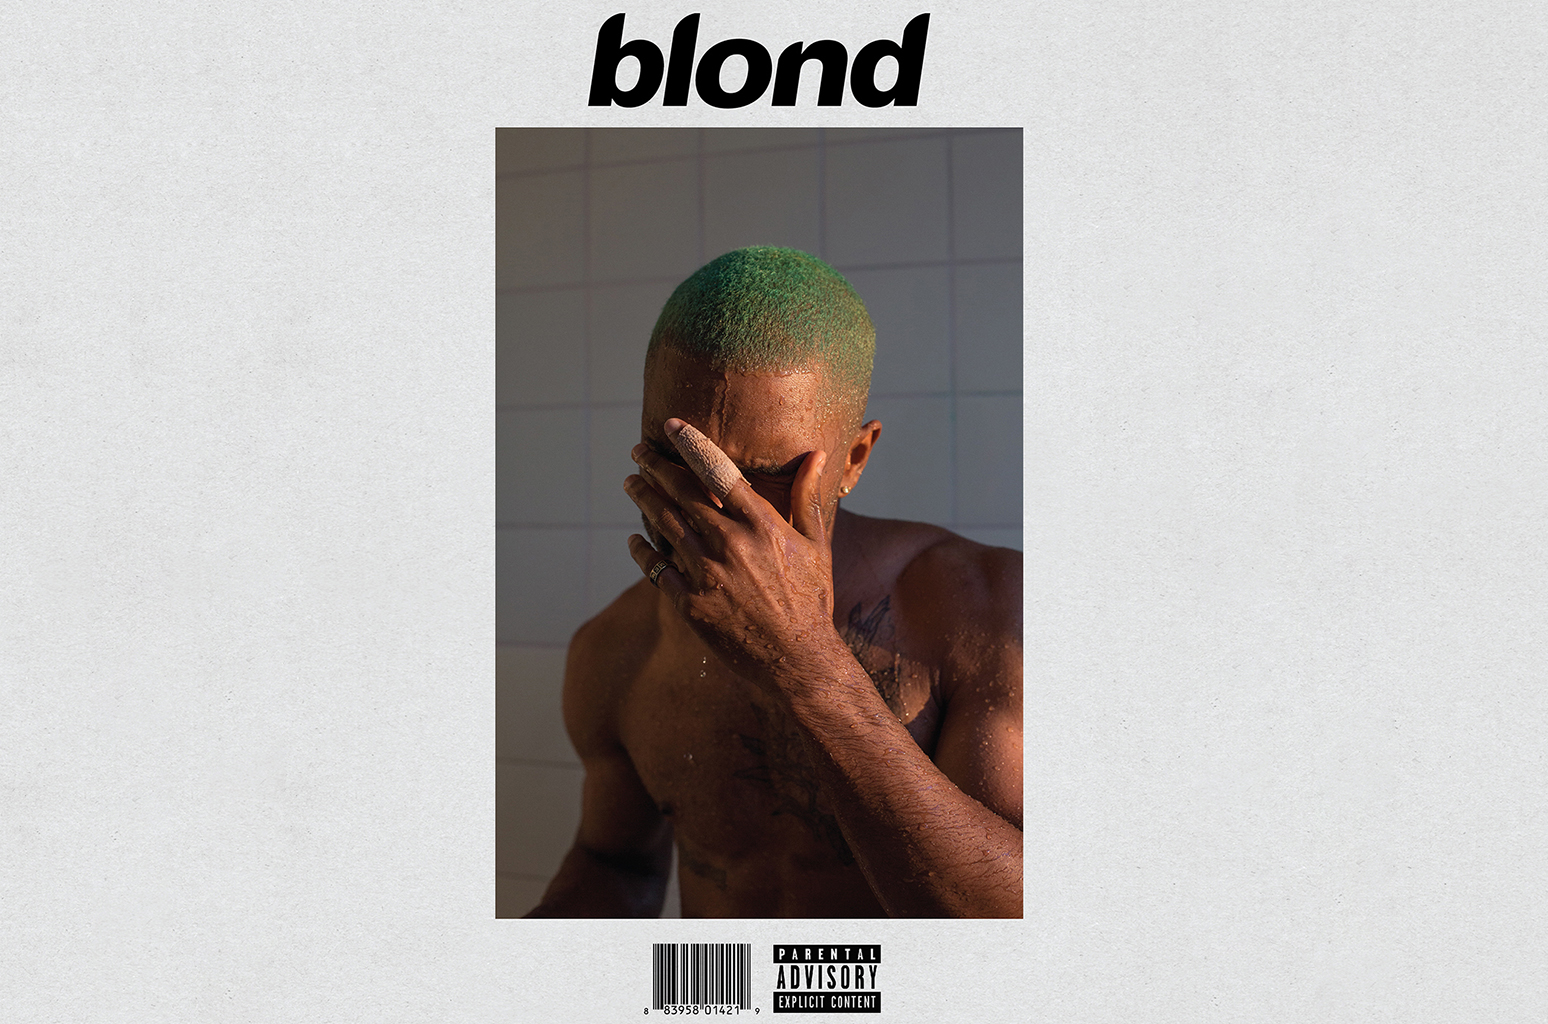 A Year With Frank Oceans Blonde F Newsmagazine